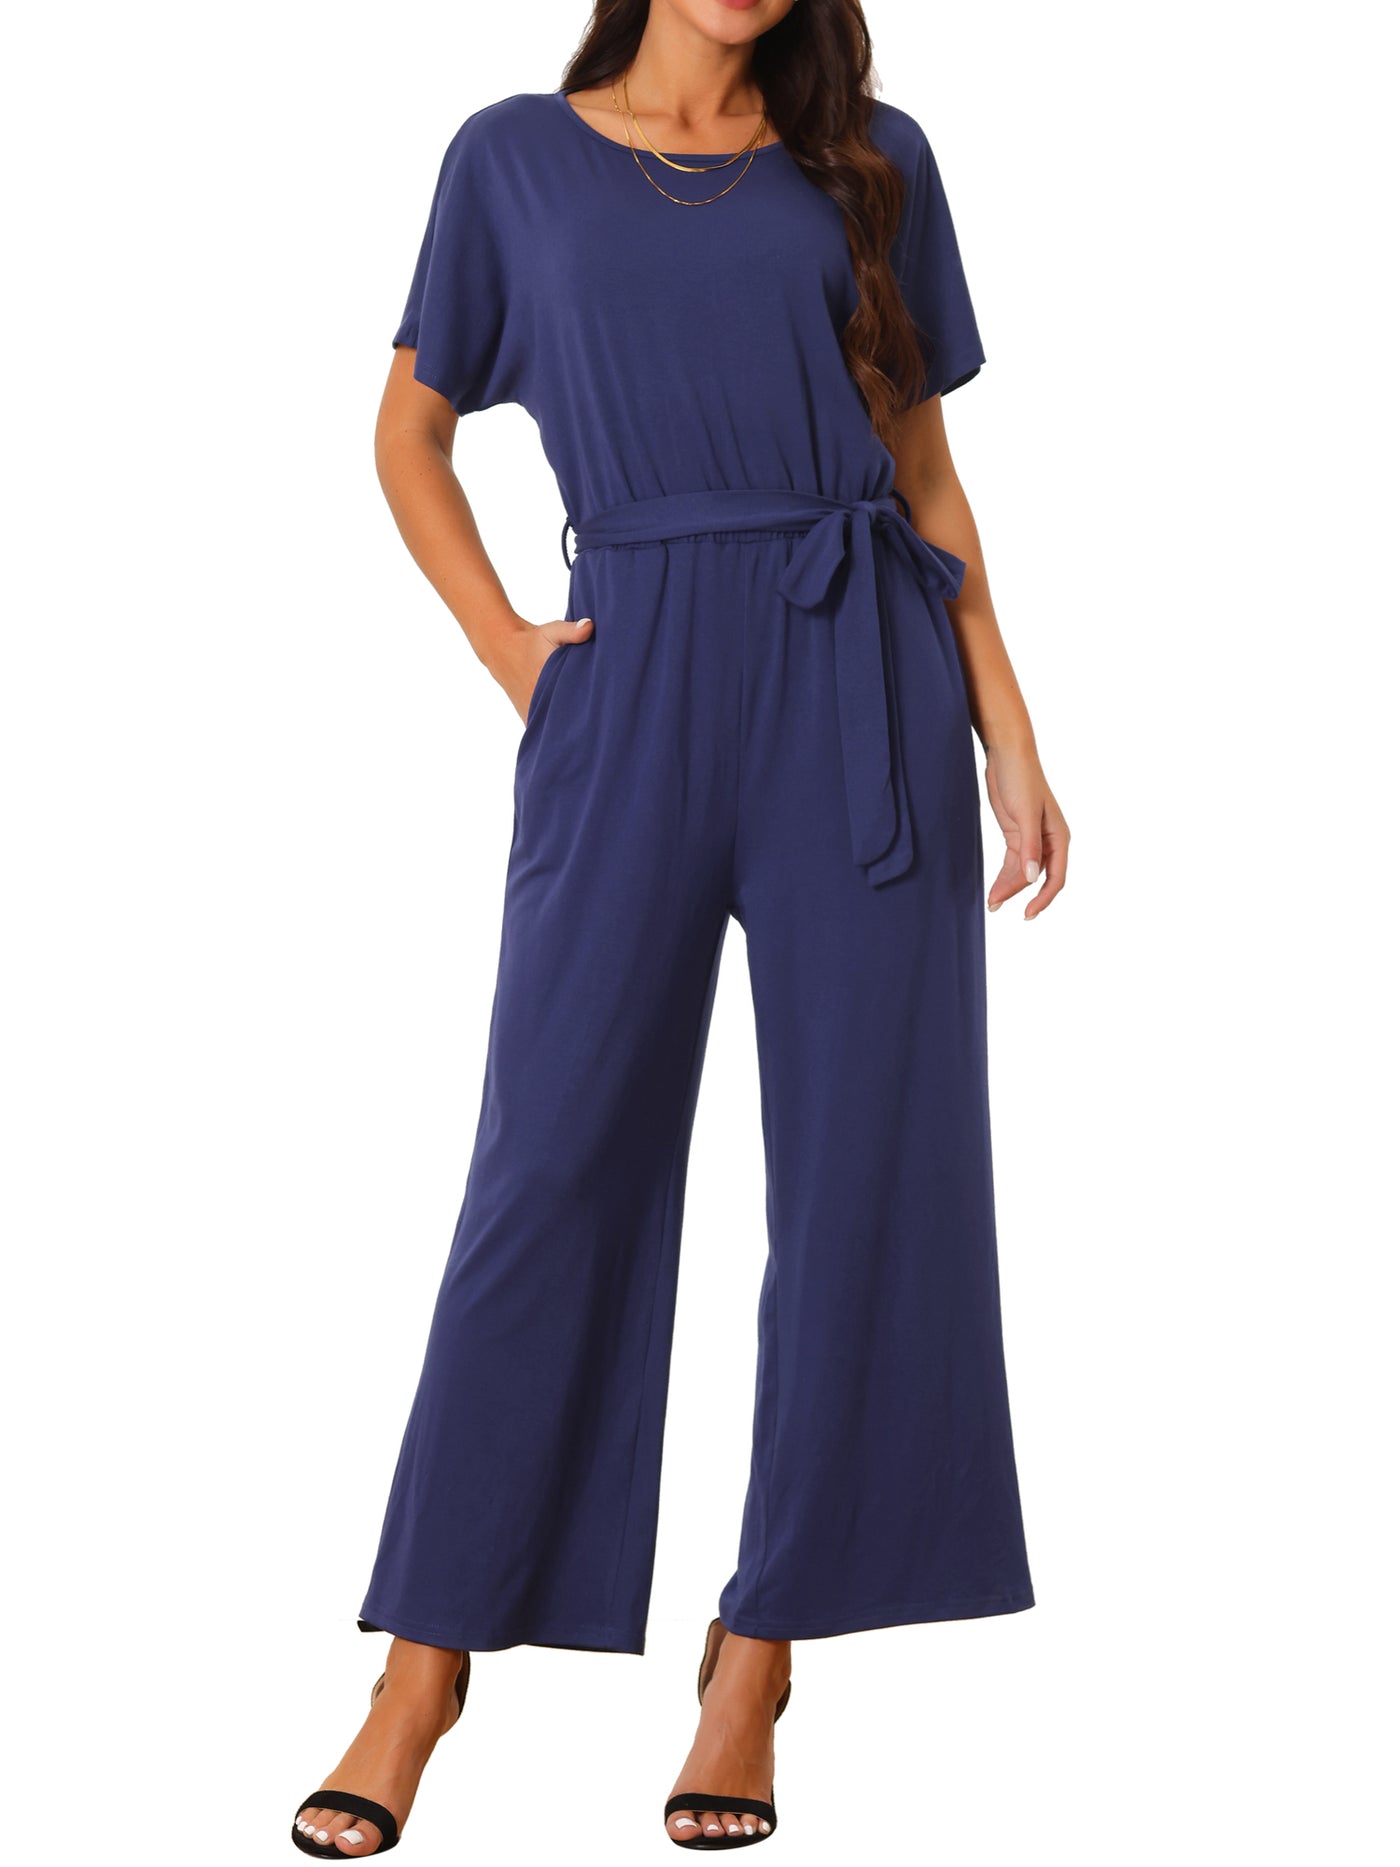 Bublédon Women's Crewneck Short Sleeve Belted High Waist Wide Leg Casual Dressy Jumpsuits with Pockets